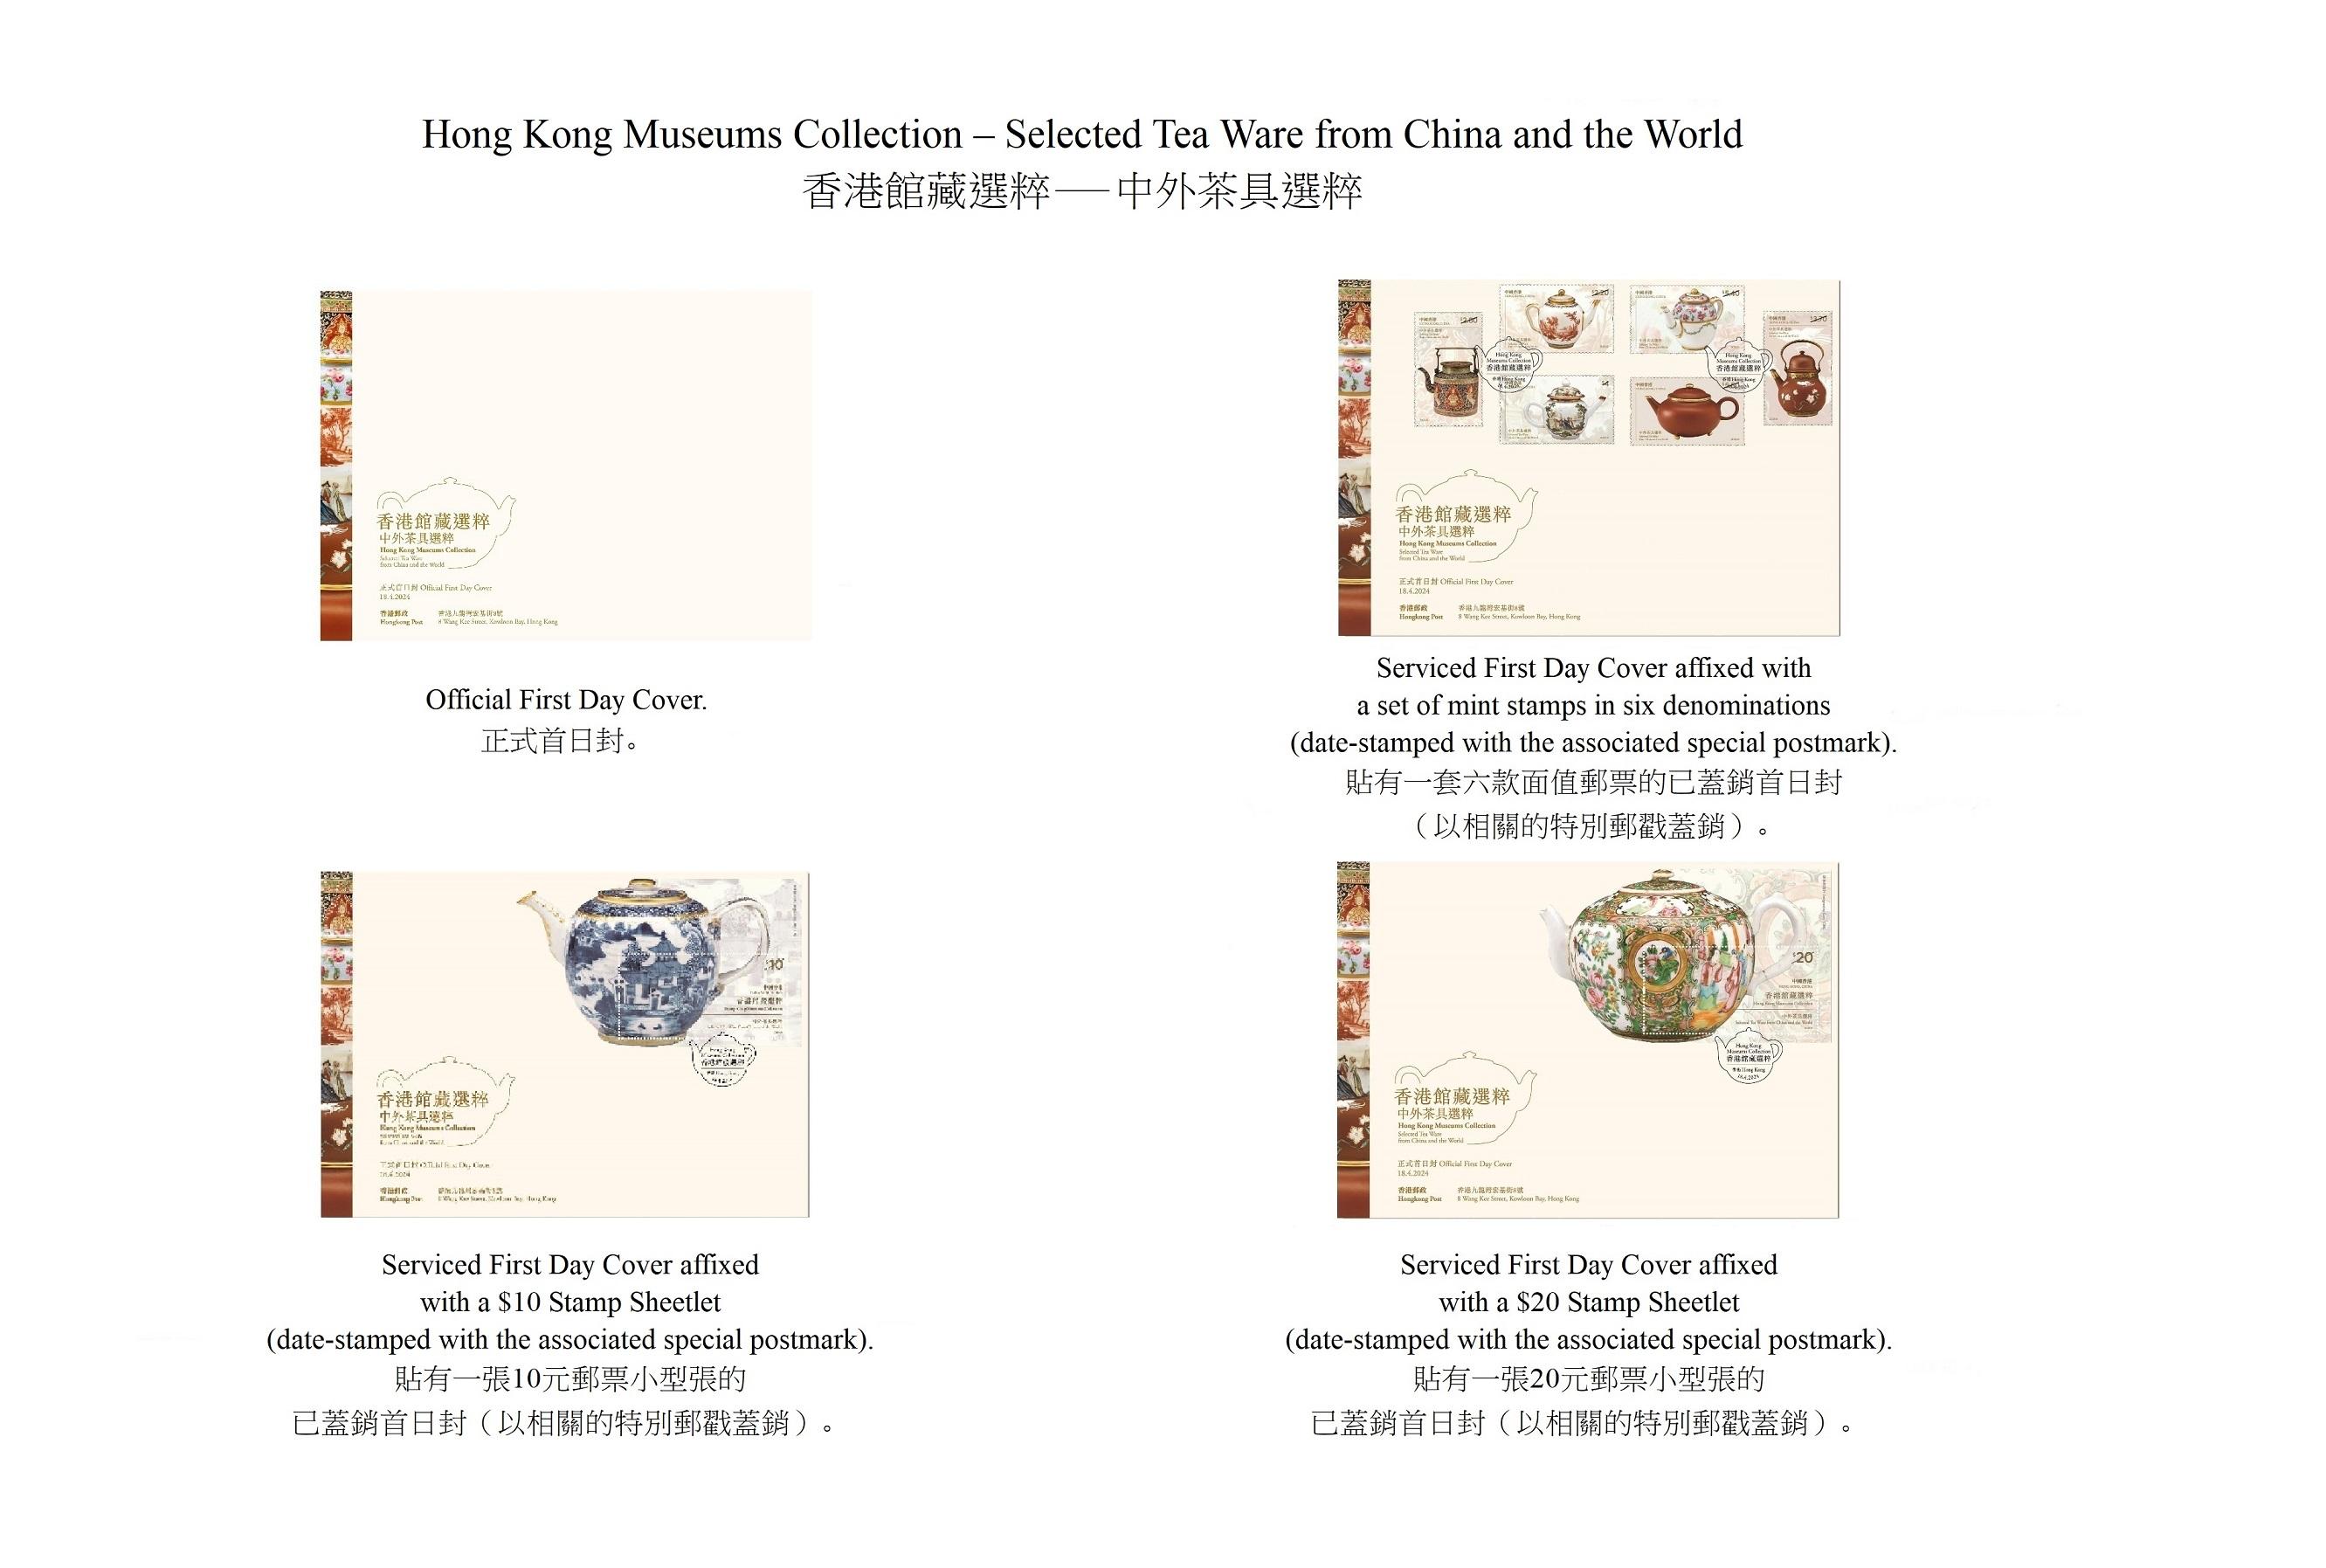 Hongkong Post will launch a special stamp issue and associated philatelic products on the theme of "Hong Kong Museums Collection - Selected Tea Ware from China and the World" on April 18 (Thursday). Photos show the first day covers.
